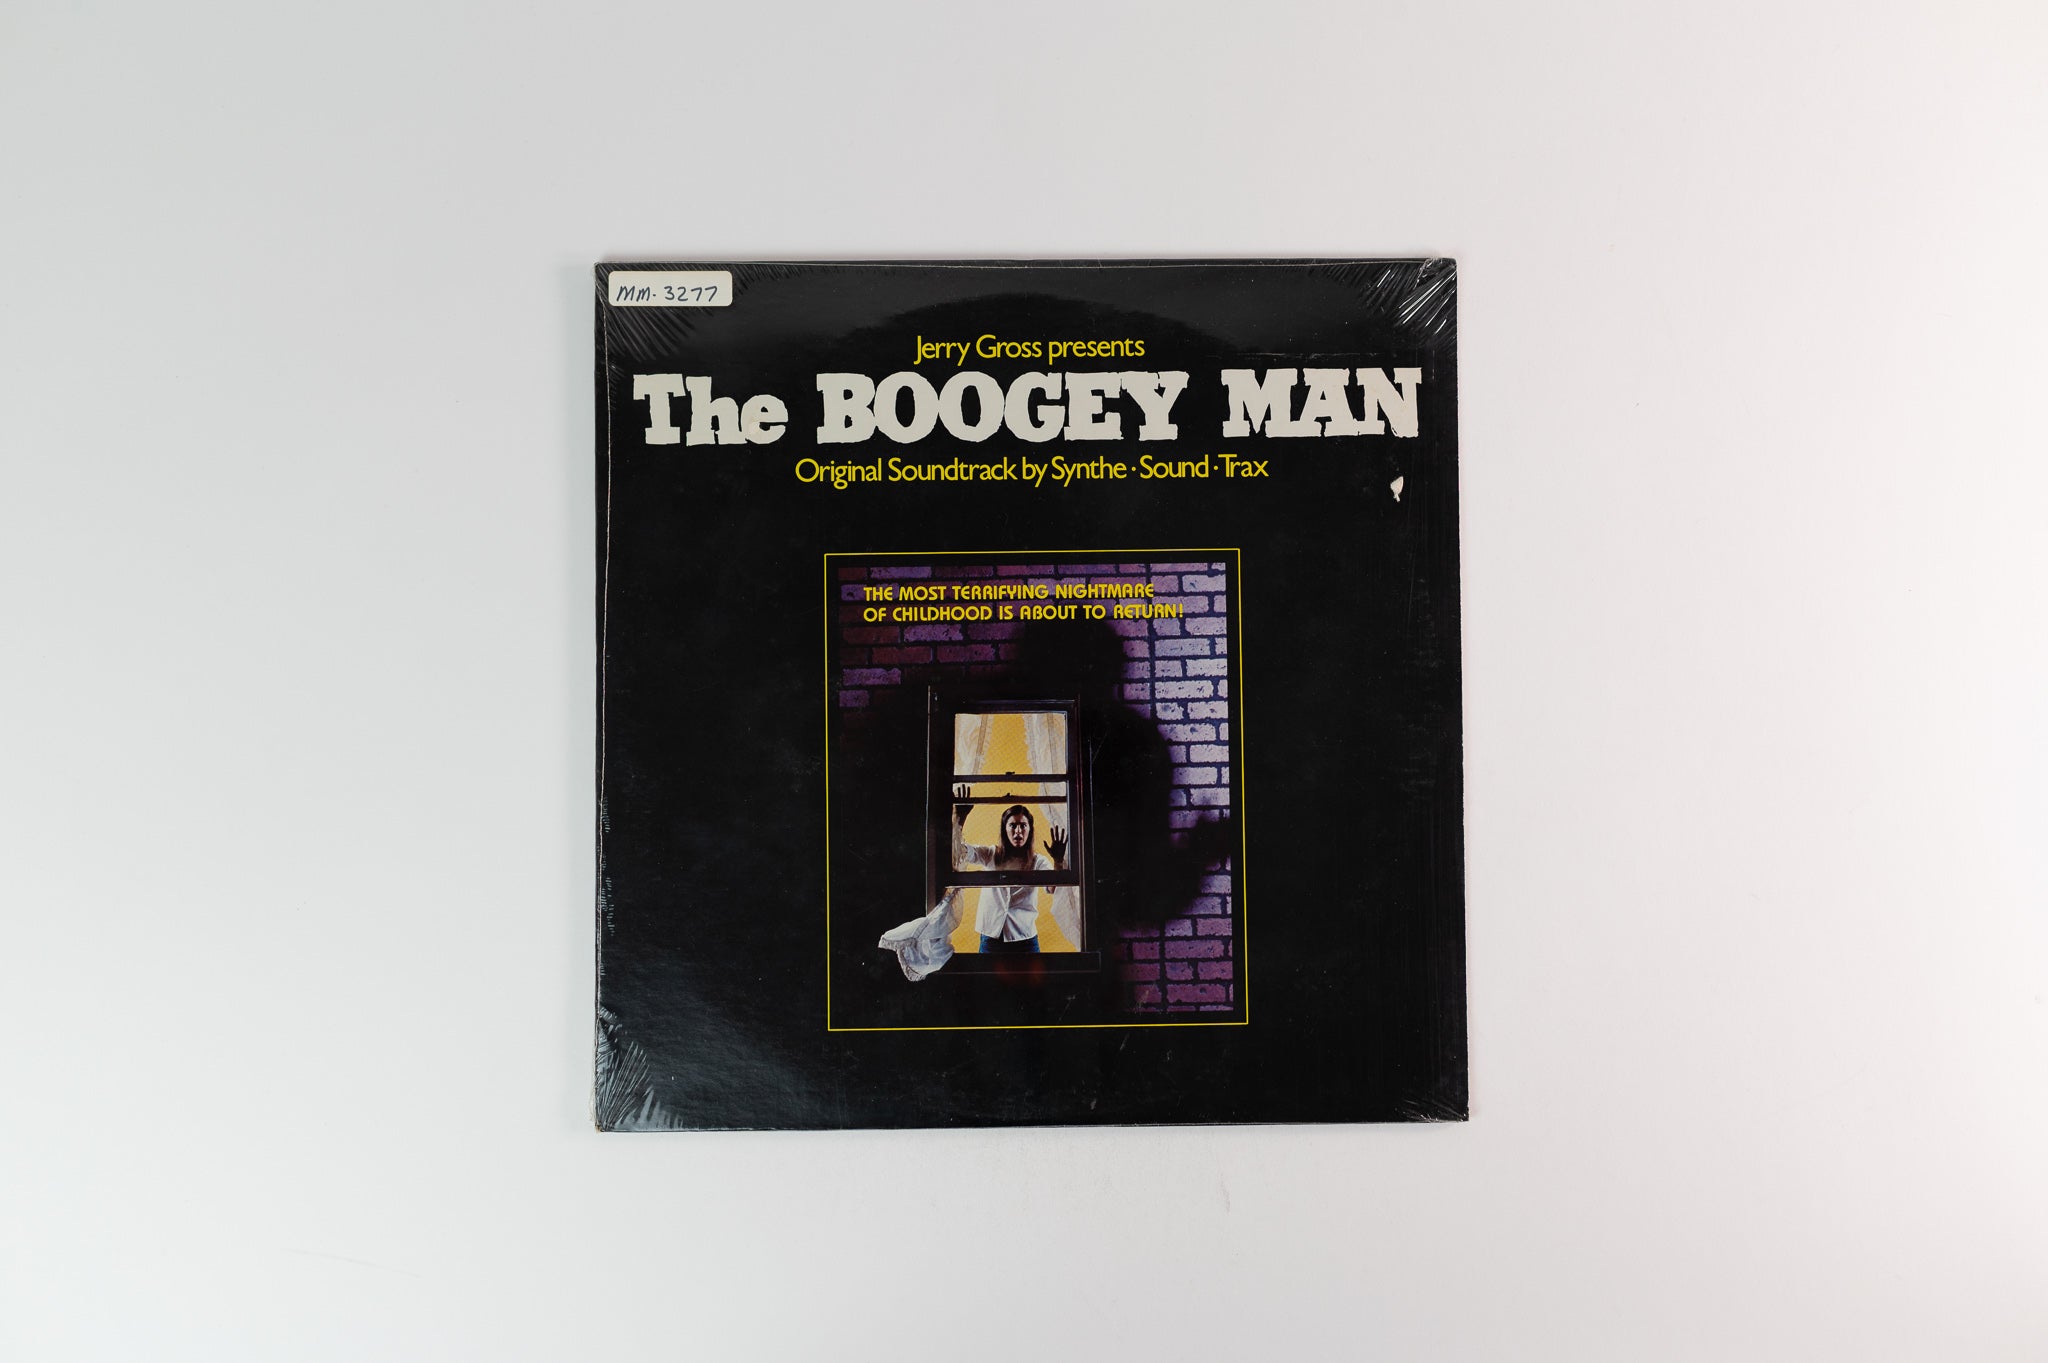 Synthe-Sound-Trax - The Boogey Man (Original Soundtrack) on Synthe Sound Trax Ltd Numbered Sealed